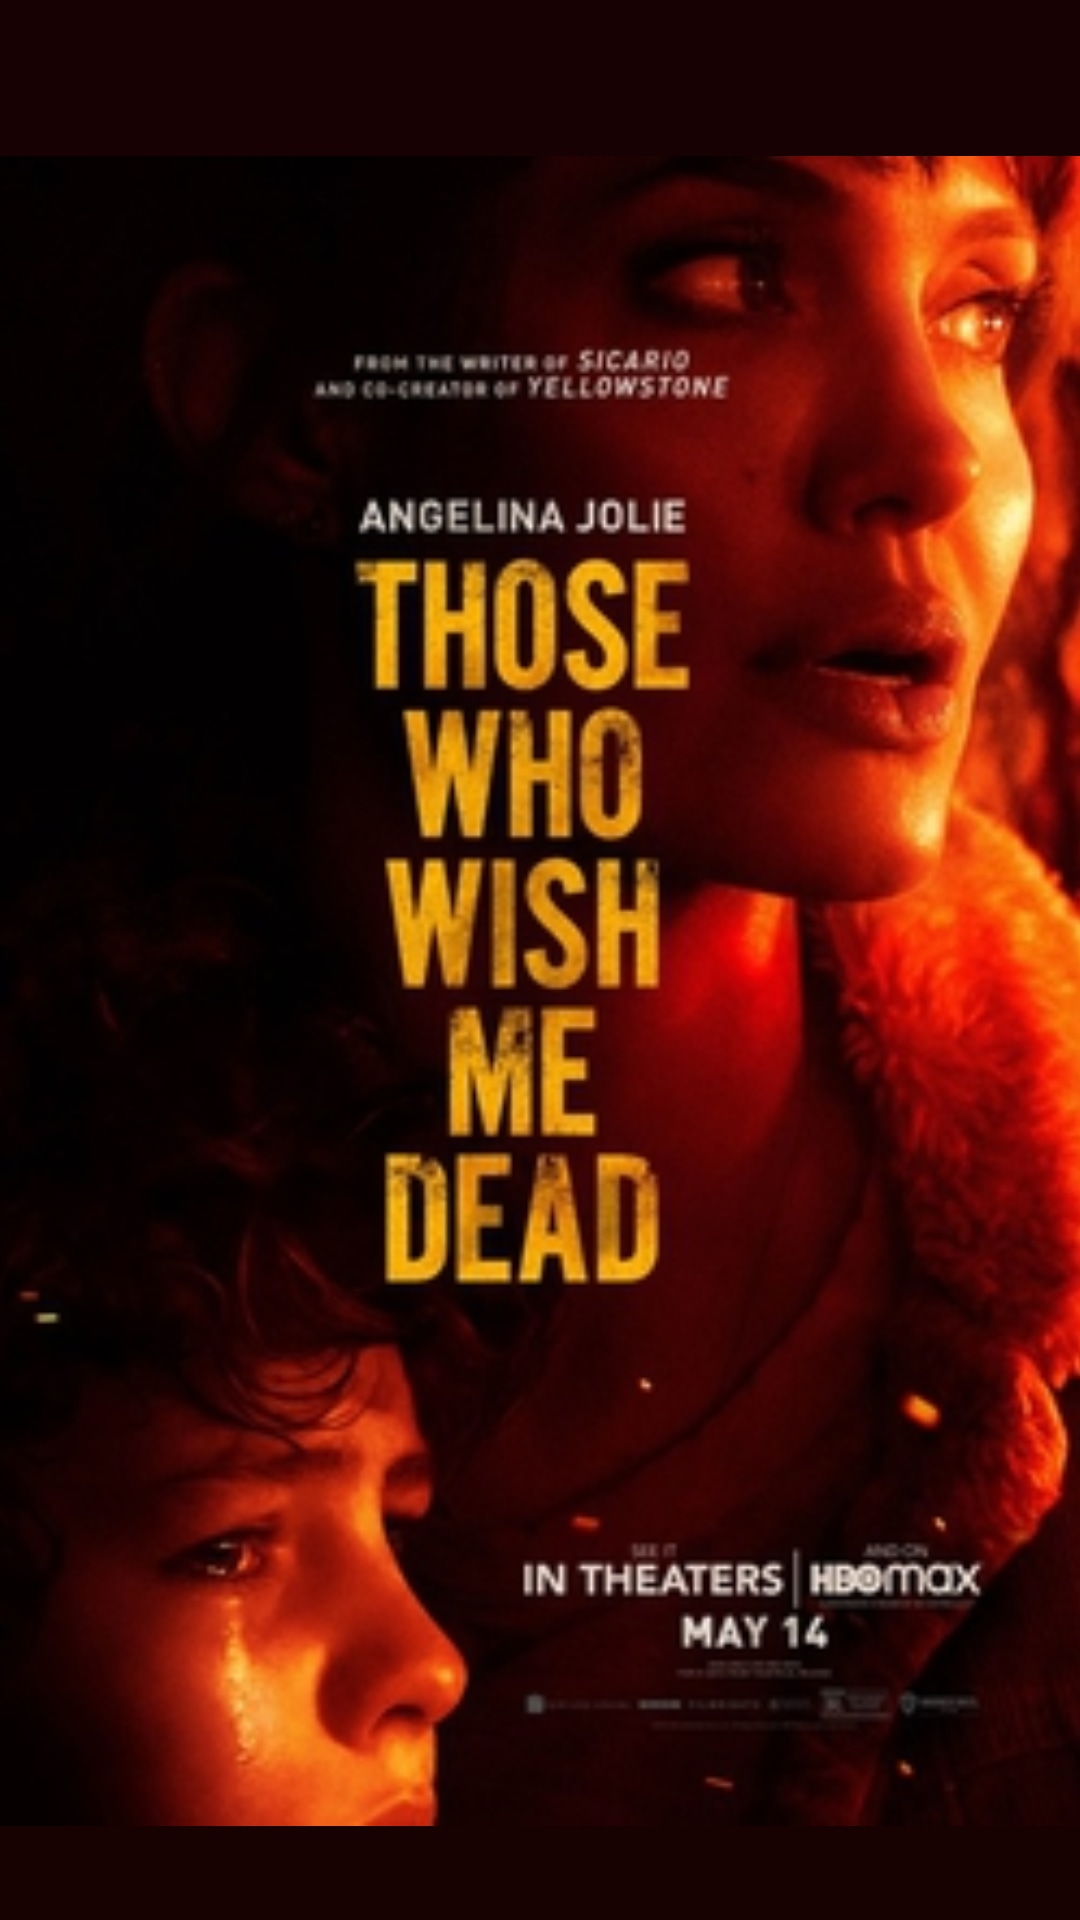 THOSE WHO WISH ME DEAD | TRAILER